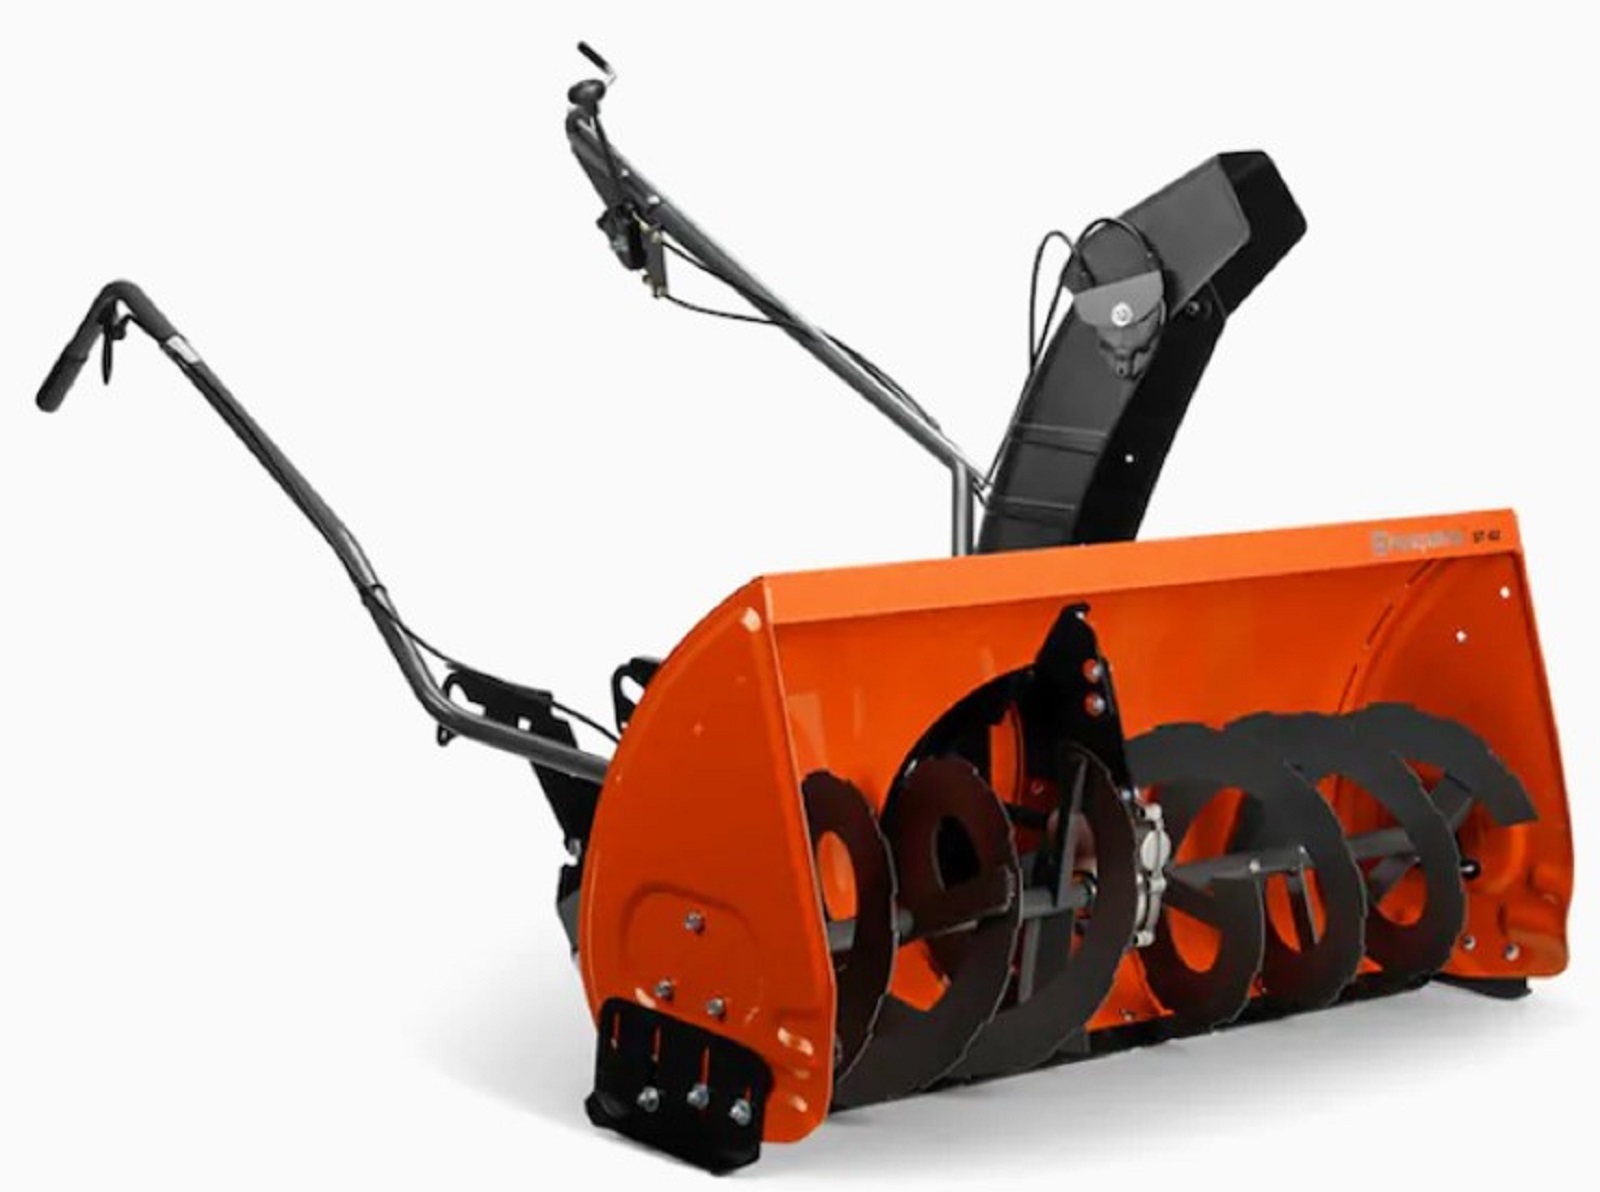 Husqvarna 967343901 42" Two-stage Residential Attachment Snow Blower